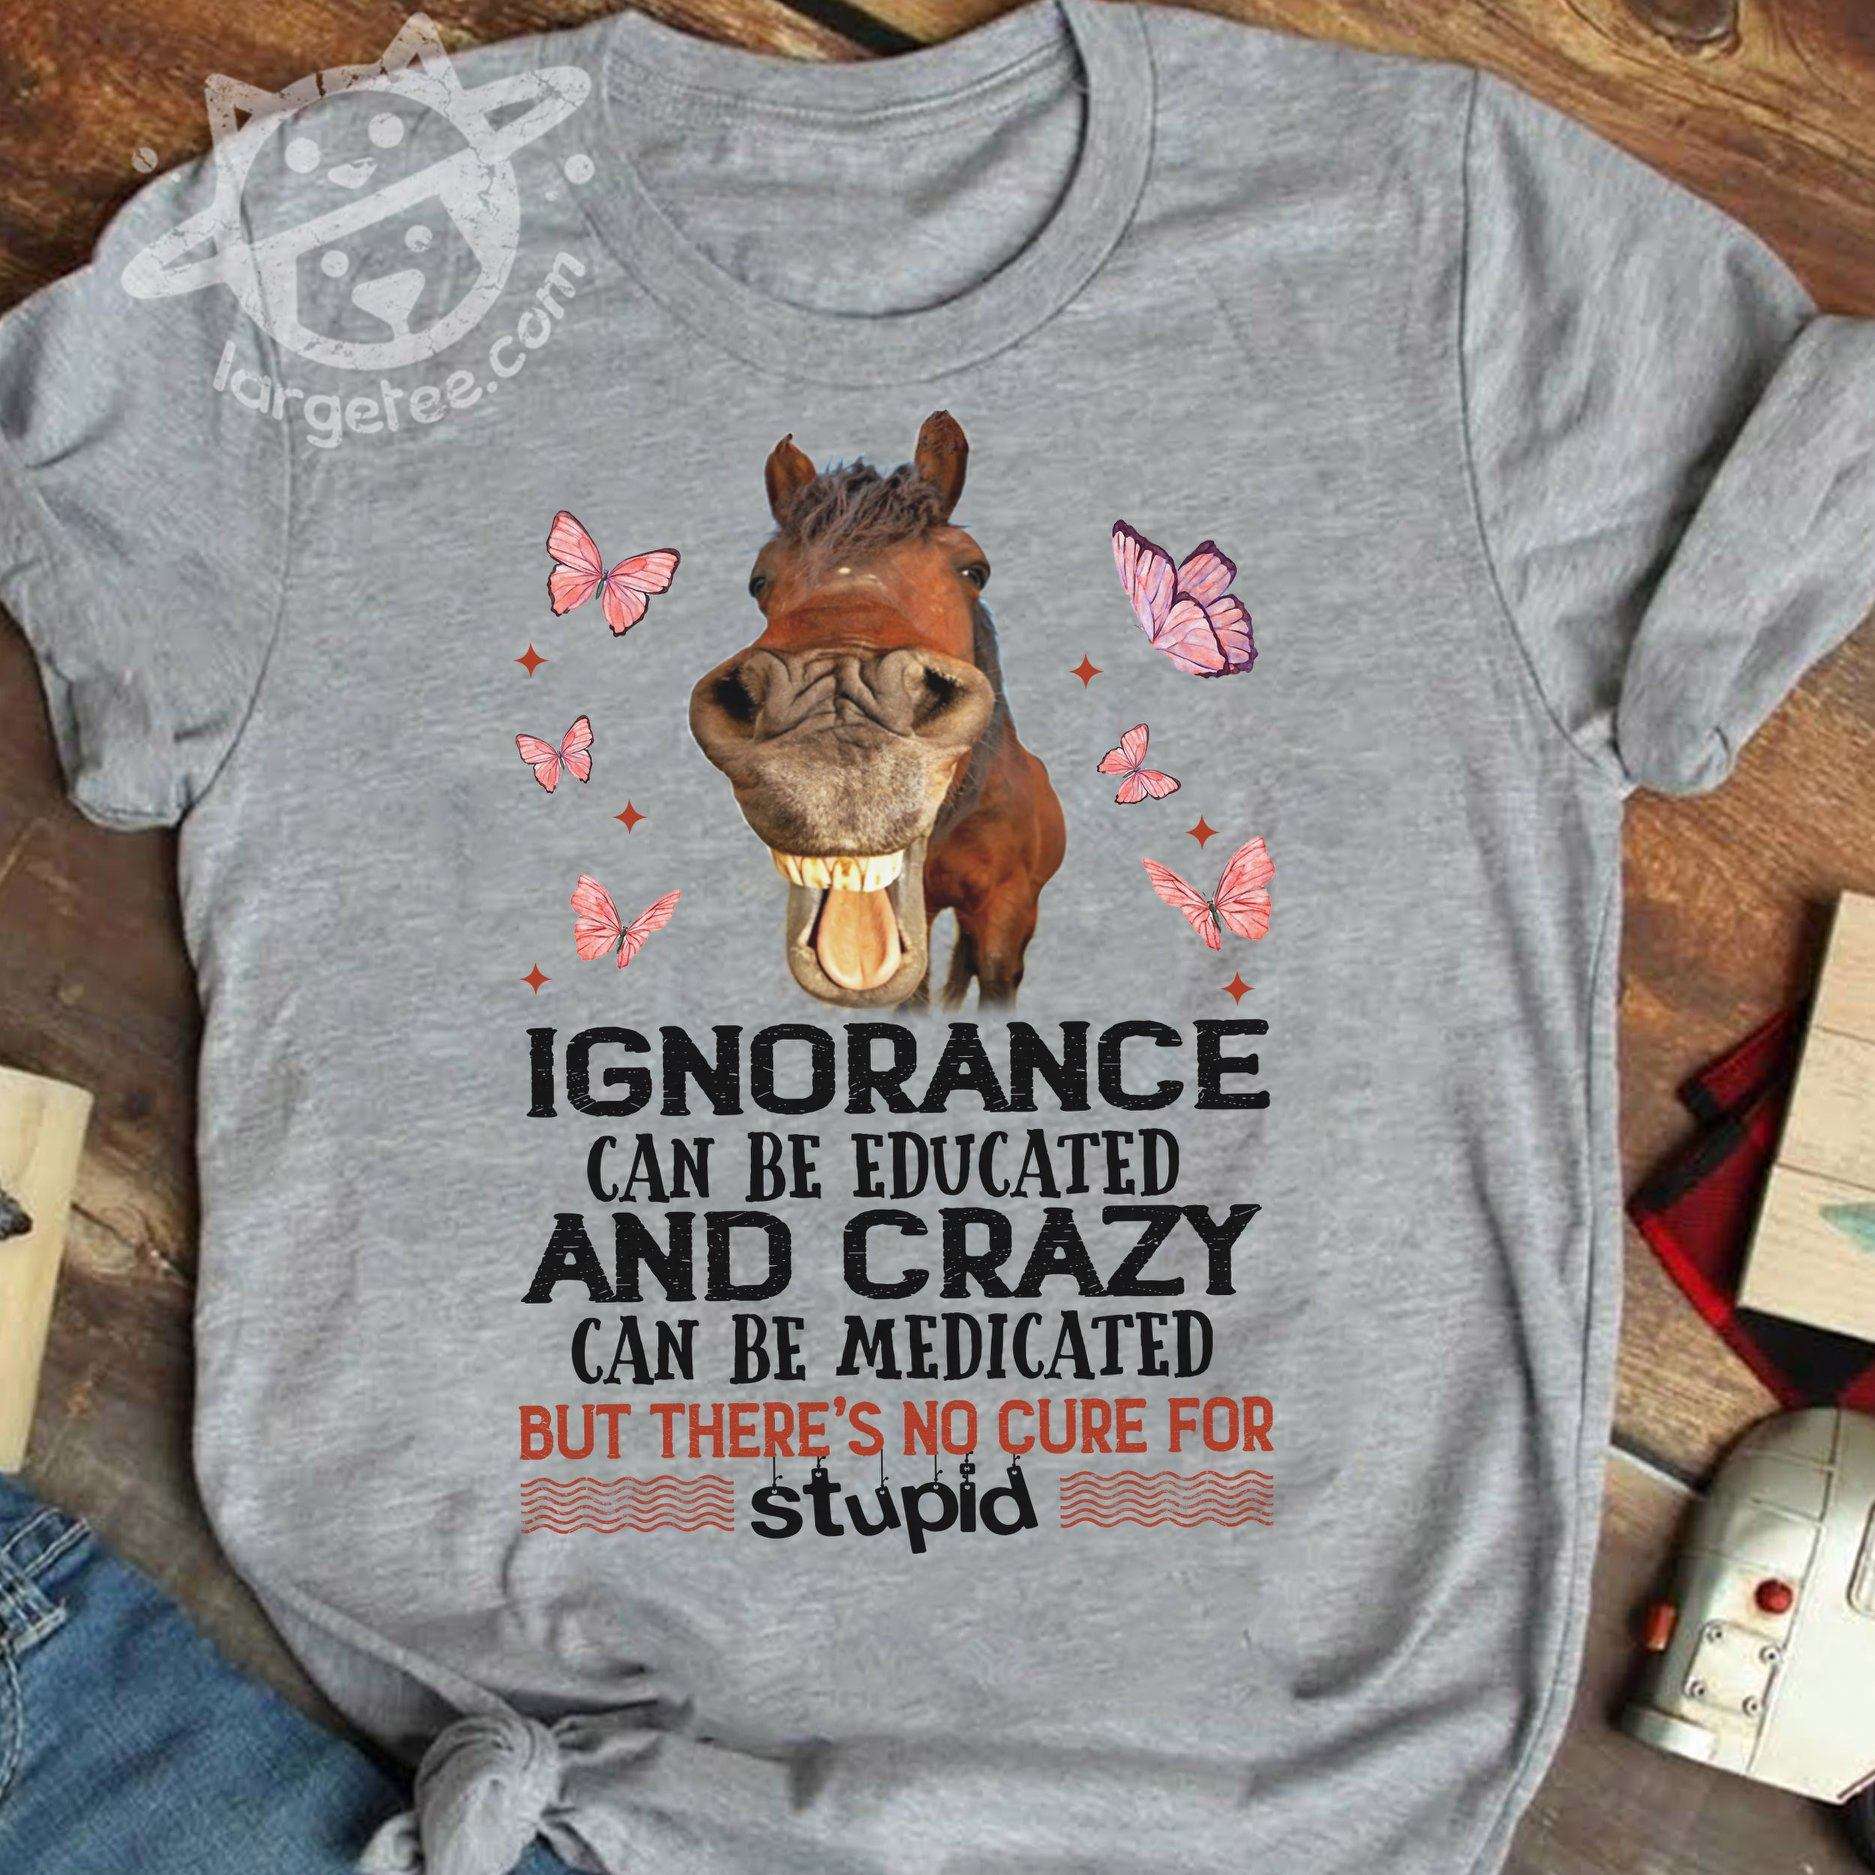 Ignorance can be educated and crazy can be medicated but there's no cure for stupid - Ignorance horse